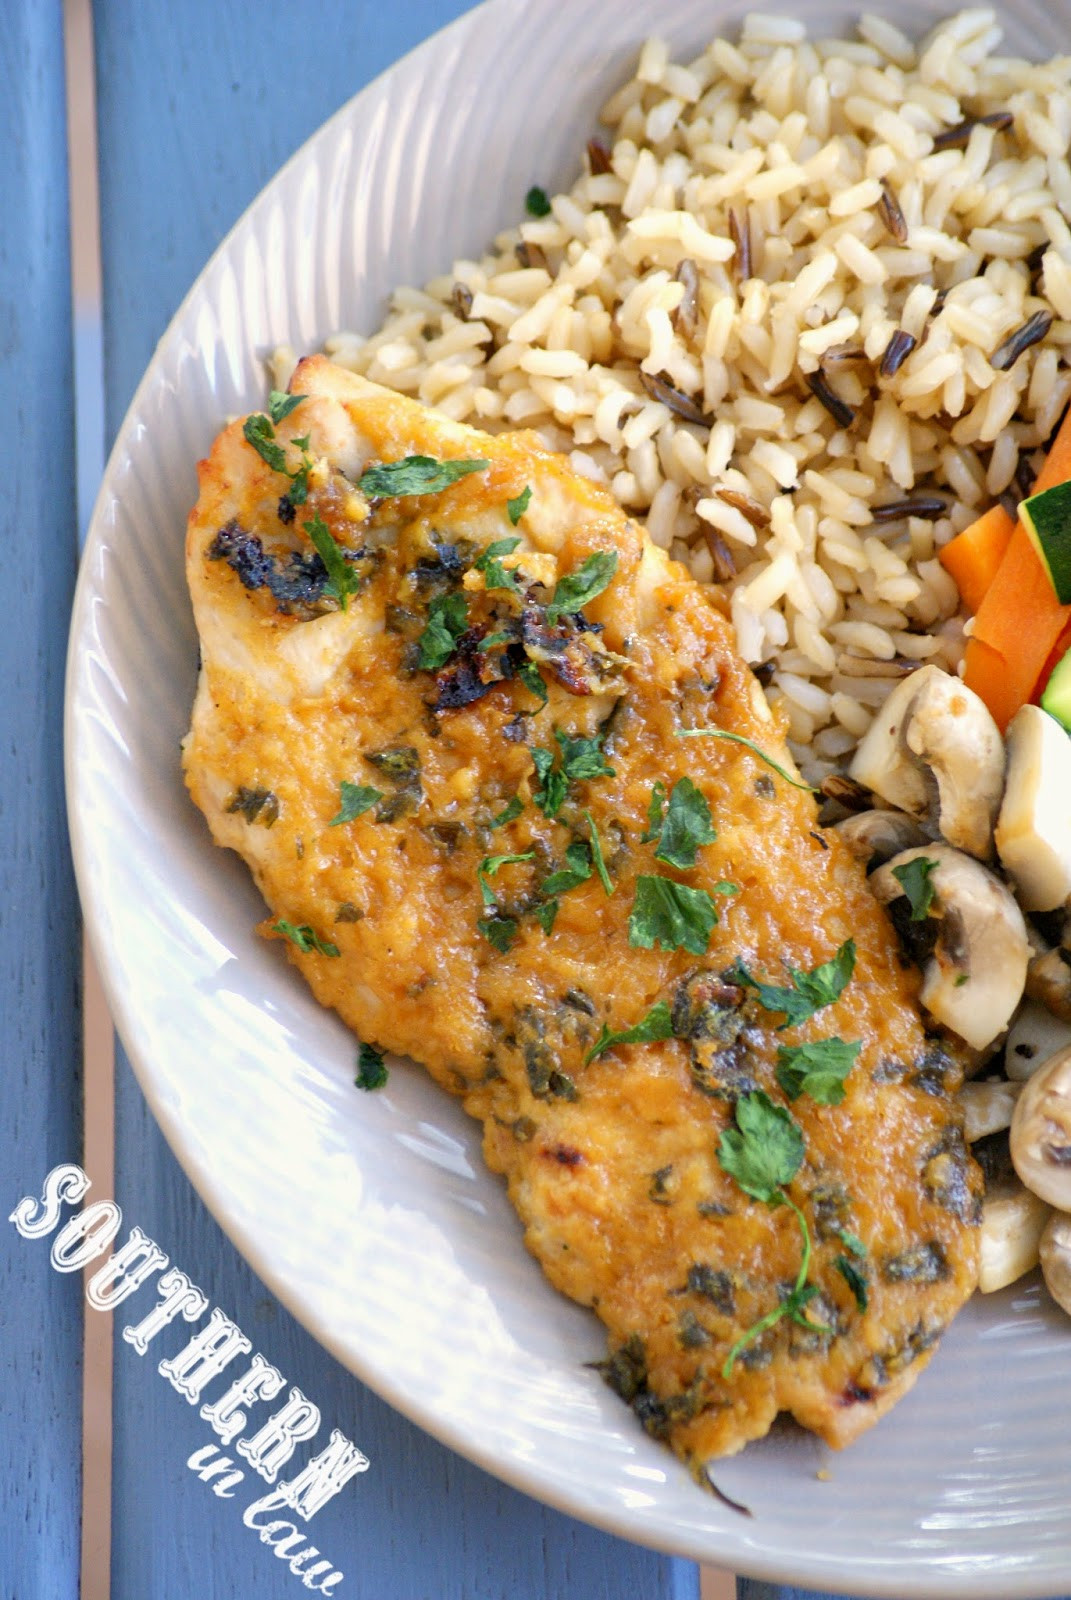 Low Cholesterol Chicken Breast Recipes
 Southern In Law Recipe Healthy Maple Dijon Baked Chicken